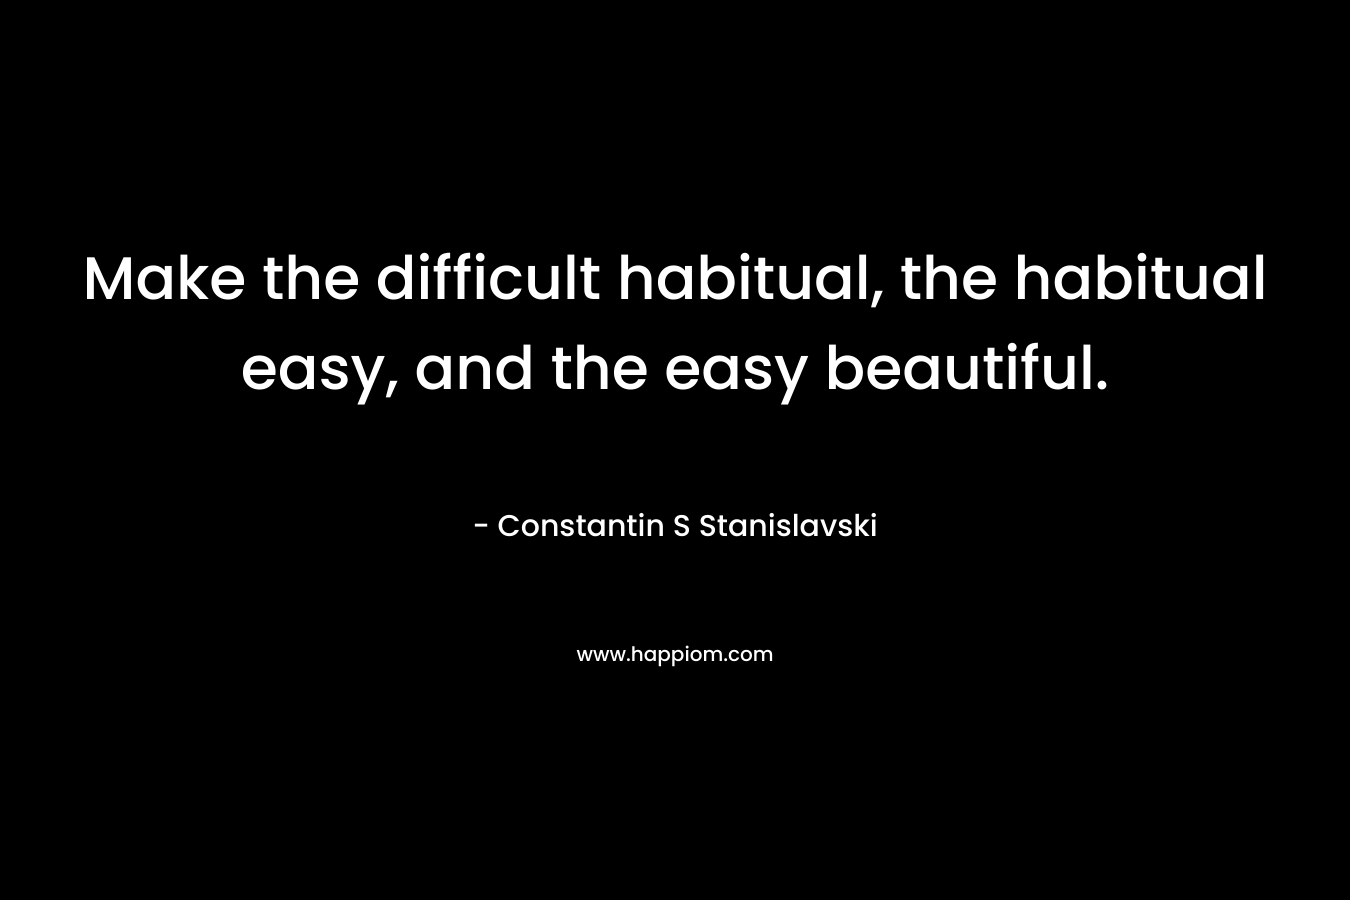 Make the difficult habitual, the habitual easy, and the easy beautiful.